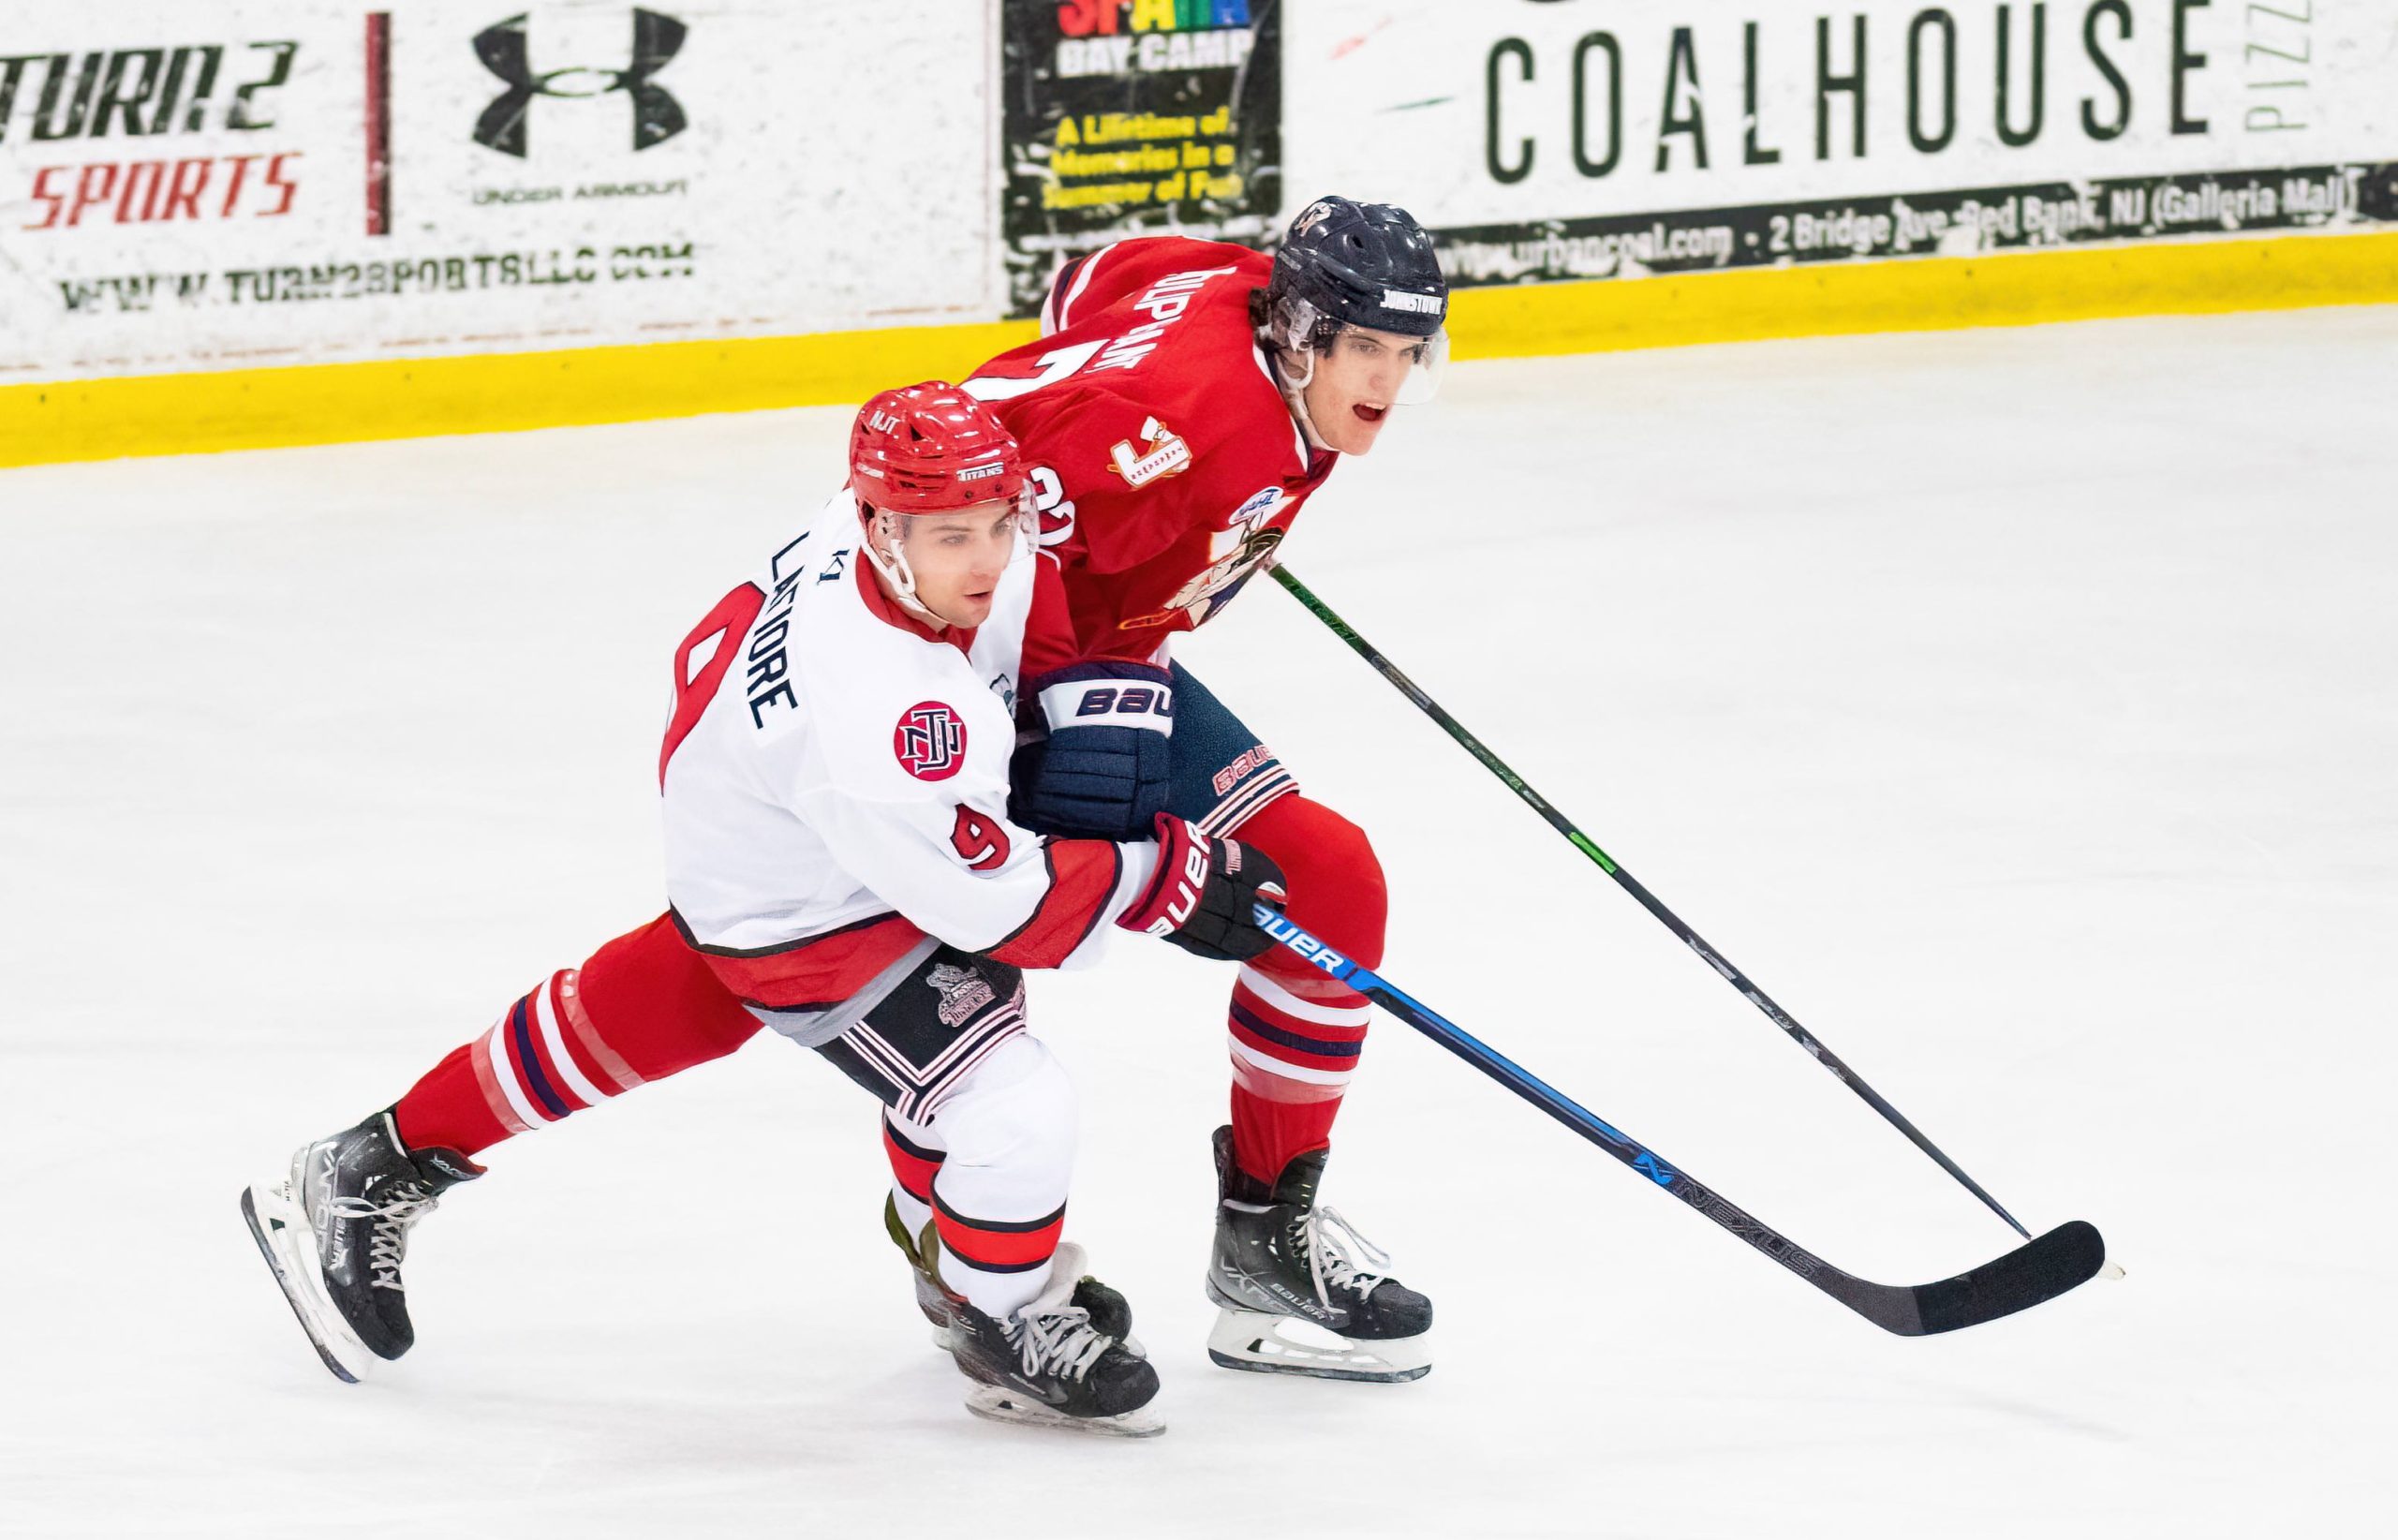 Weekend Preview: 4/1 & 4/2 – Titans host Tomahawks for last time this regular season